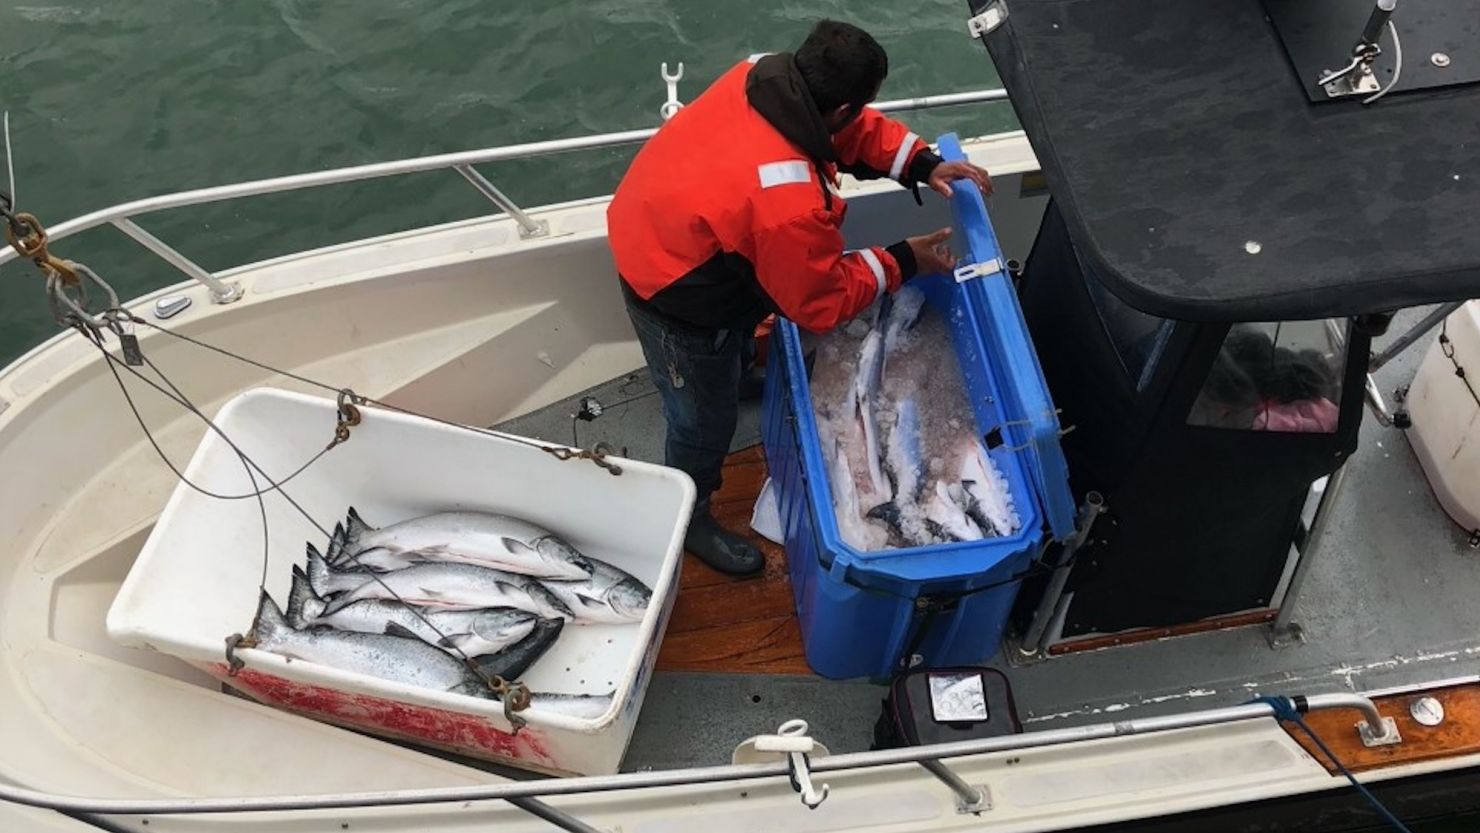 Salmon fishing off California's coast banned for second year in a